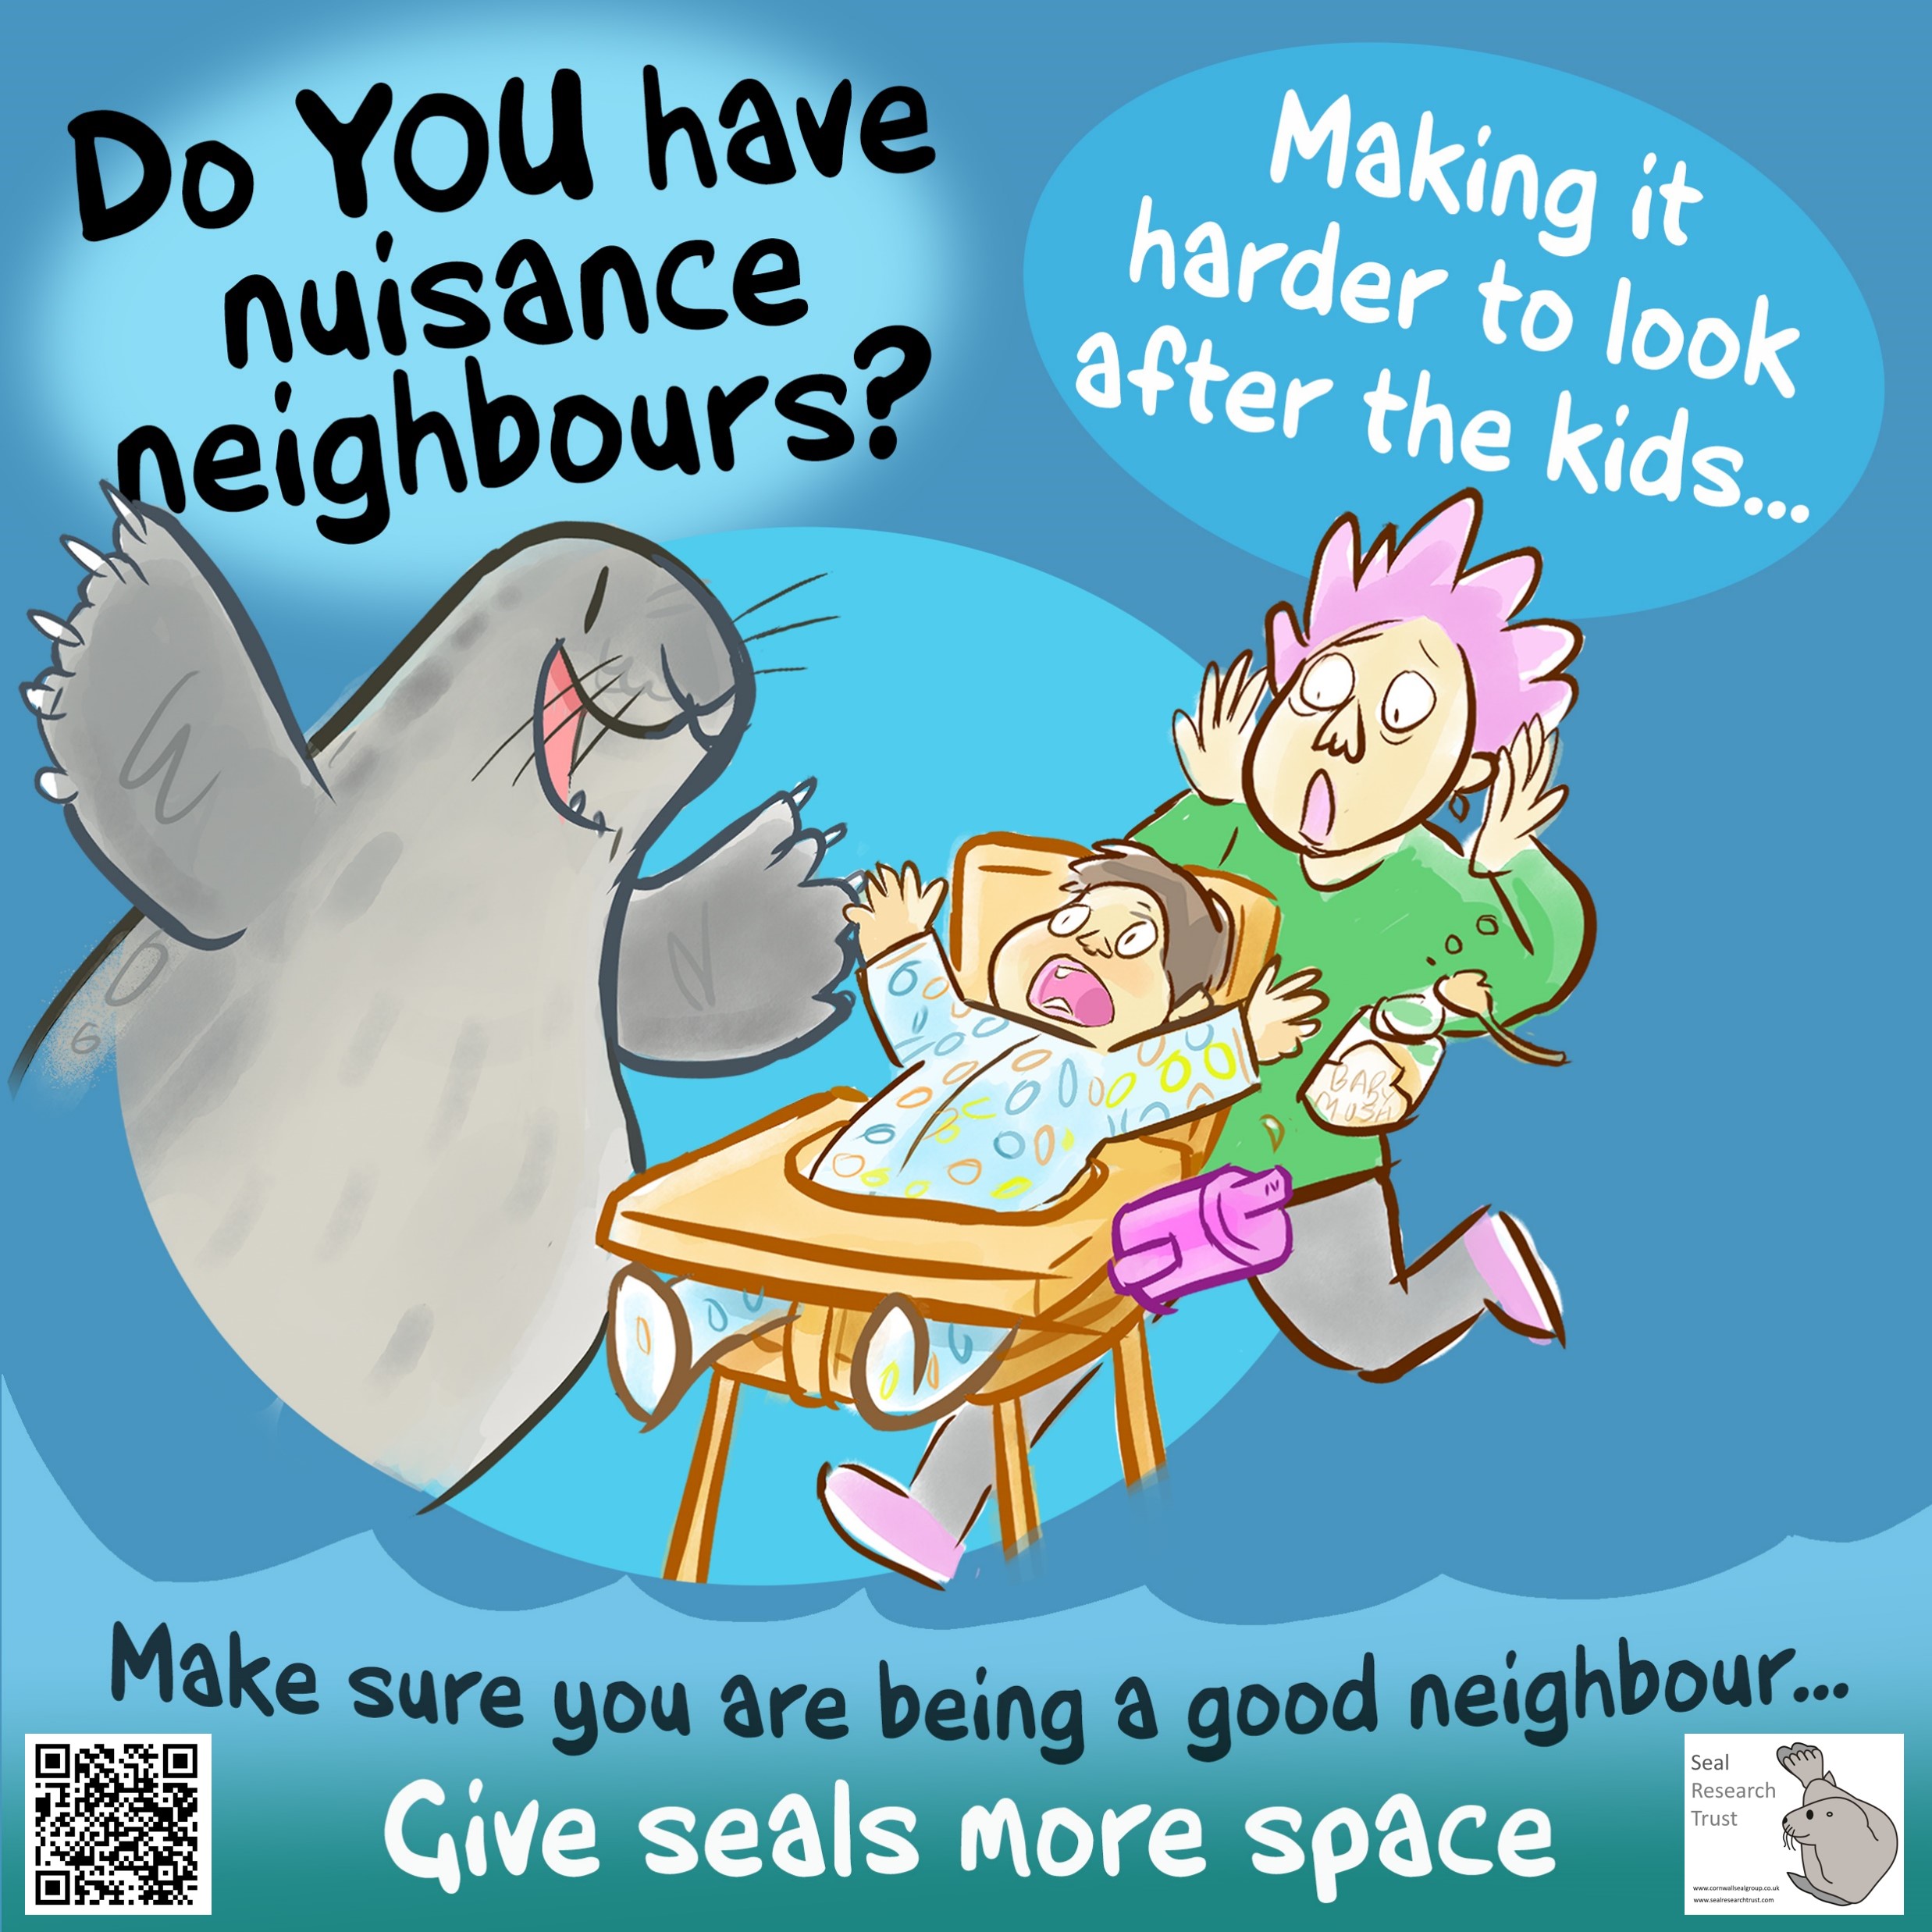 A social media graphic encouraging people to be better neighbours when it comes to having children near seals